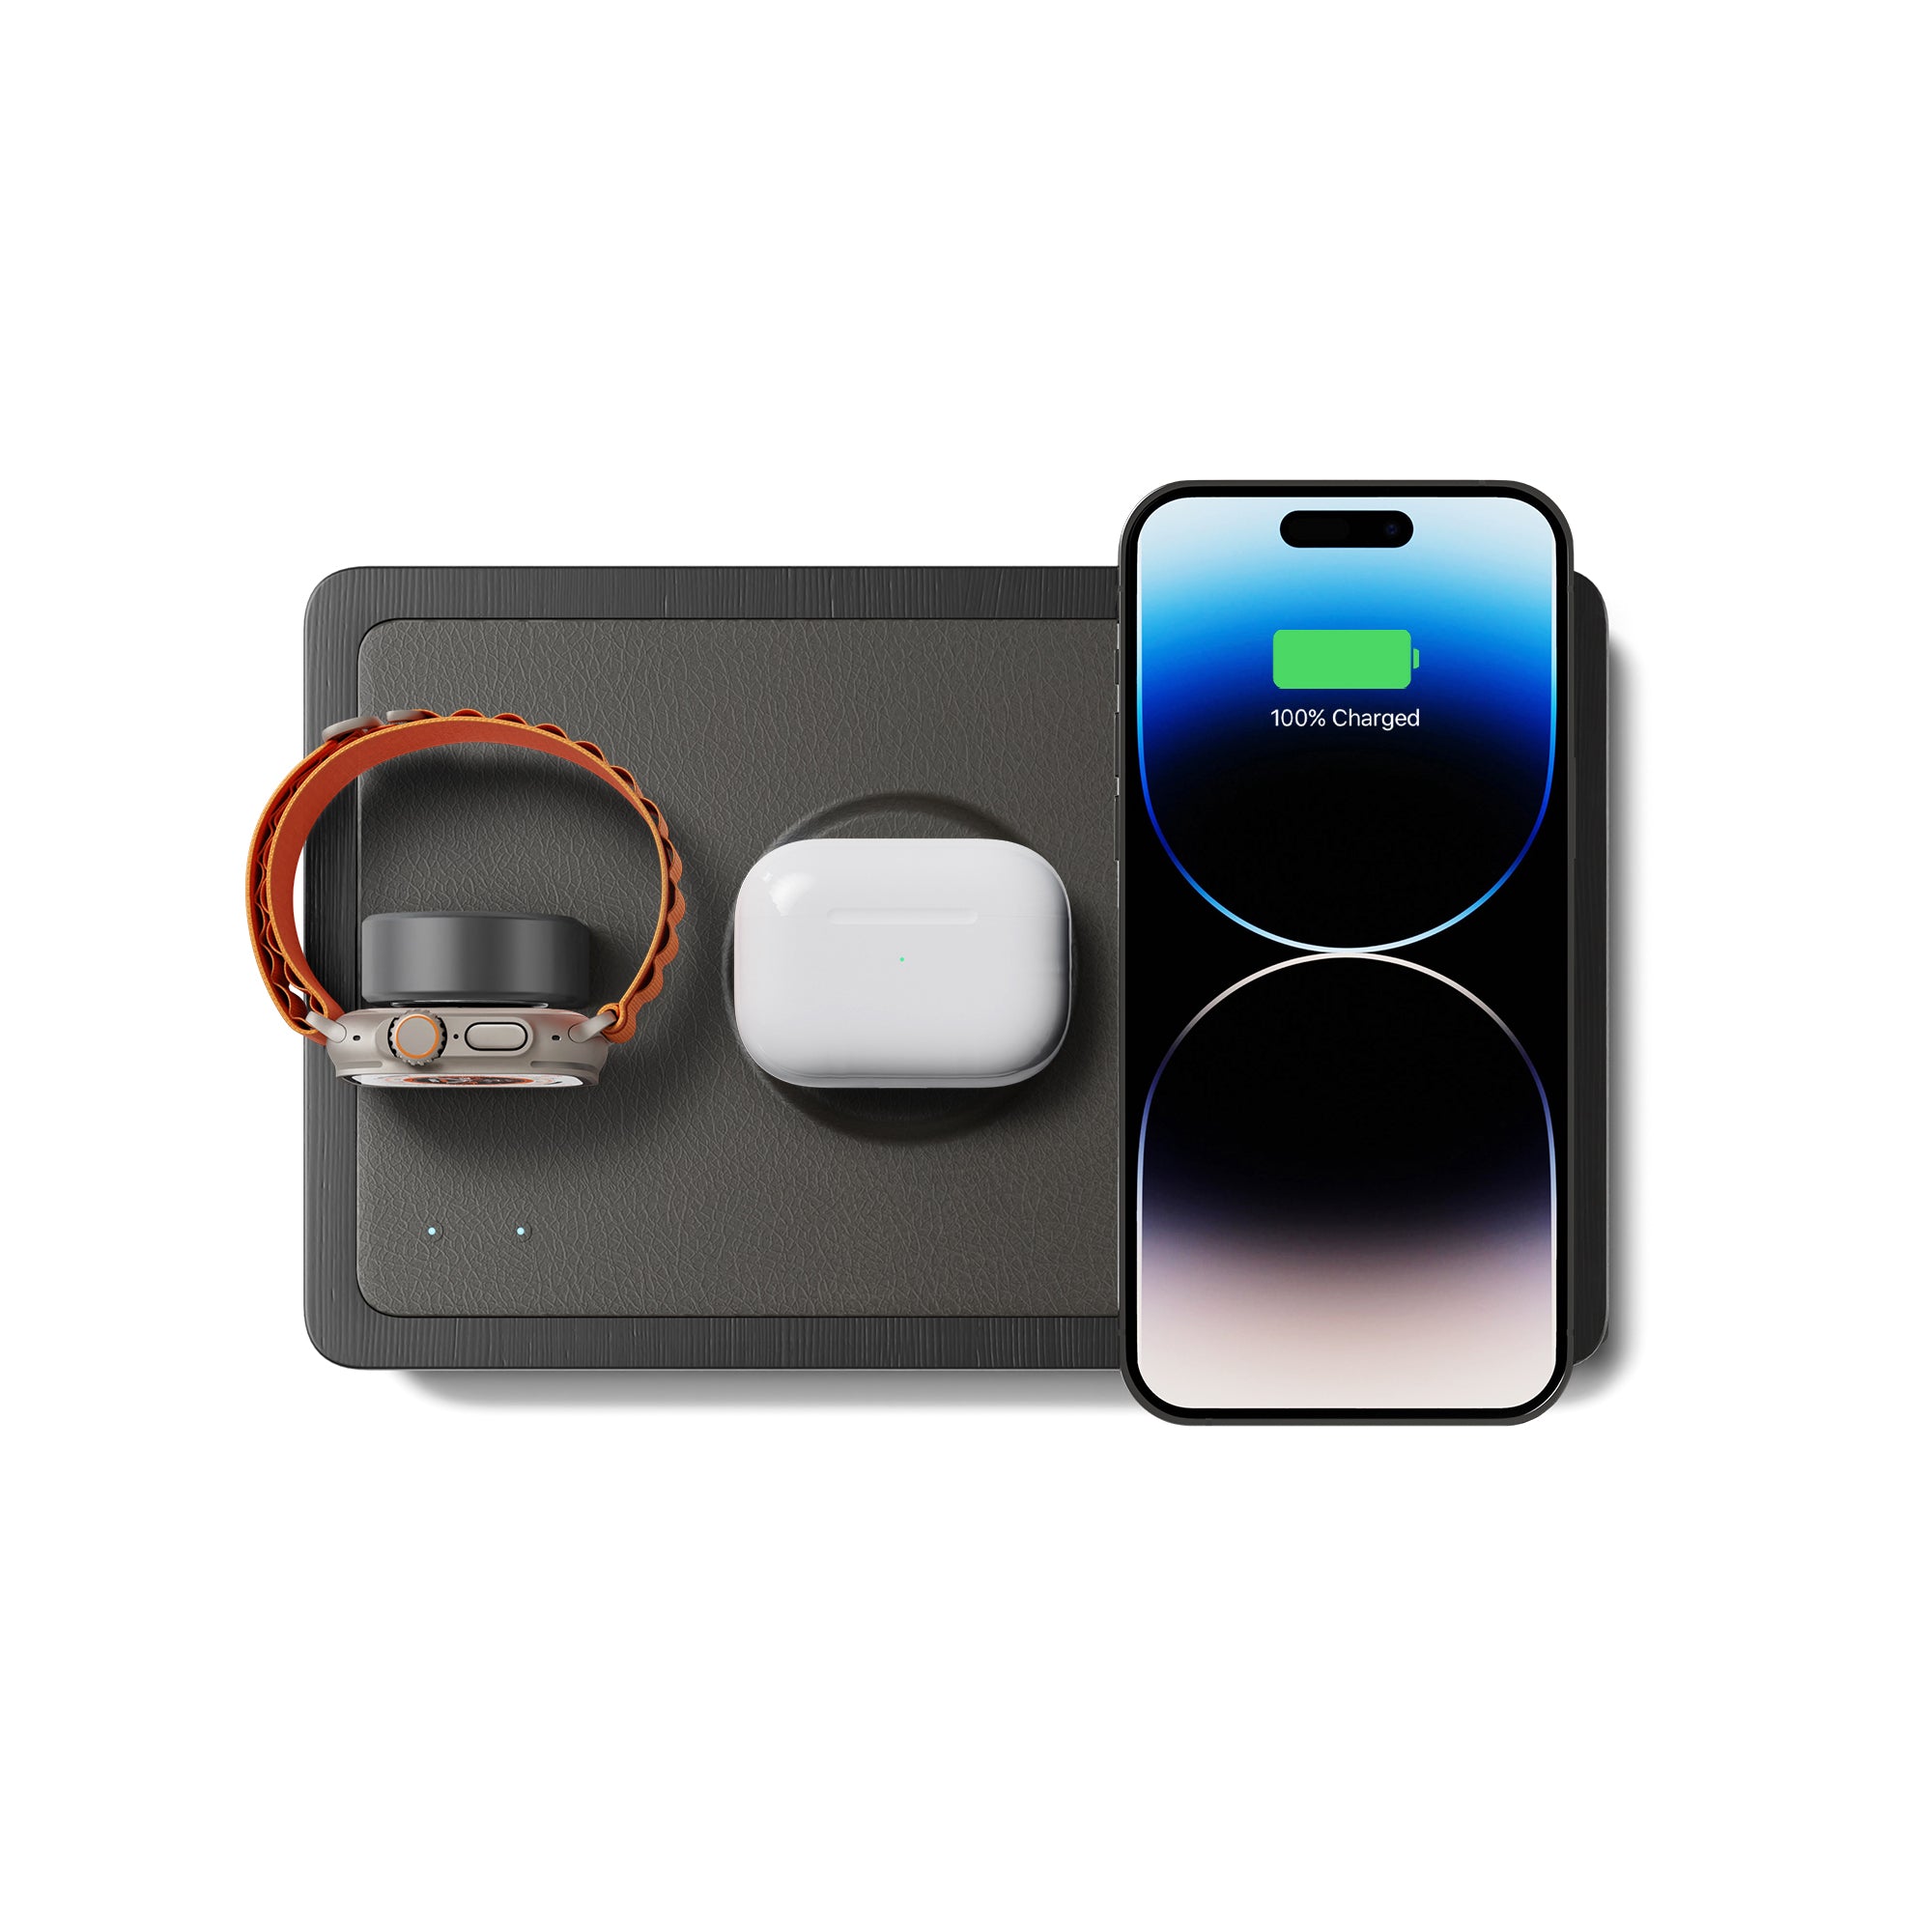 TRIO Black - 3-in-1 MagSafe Midnight Black Wireless Charger with Apple Watch Support